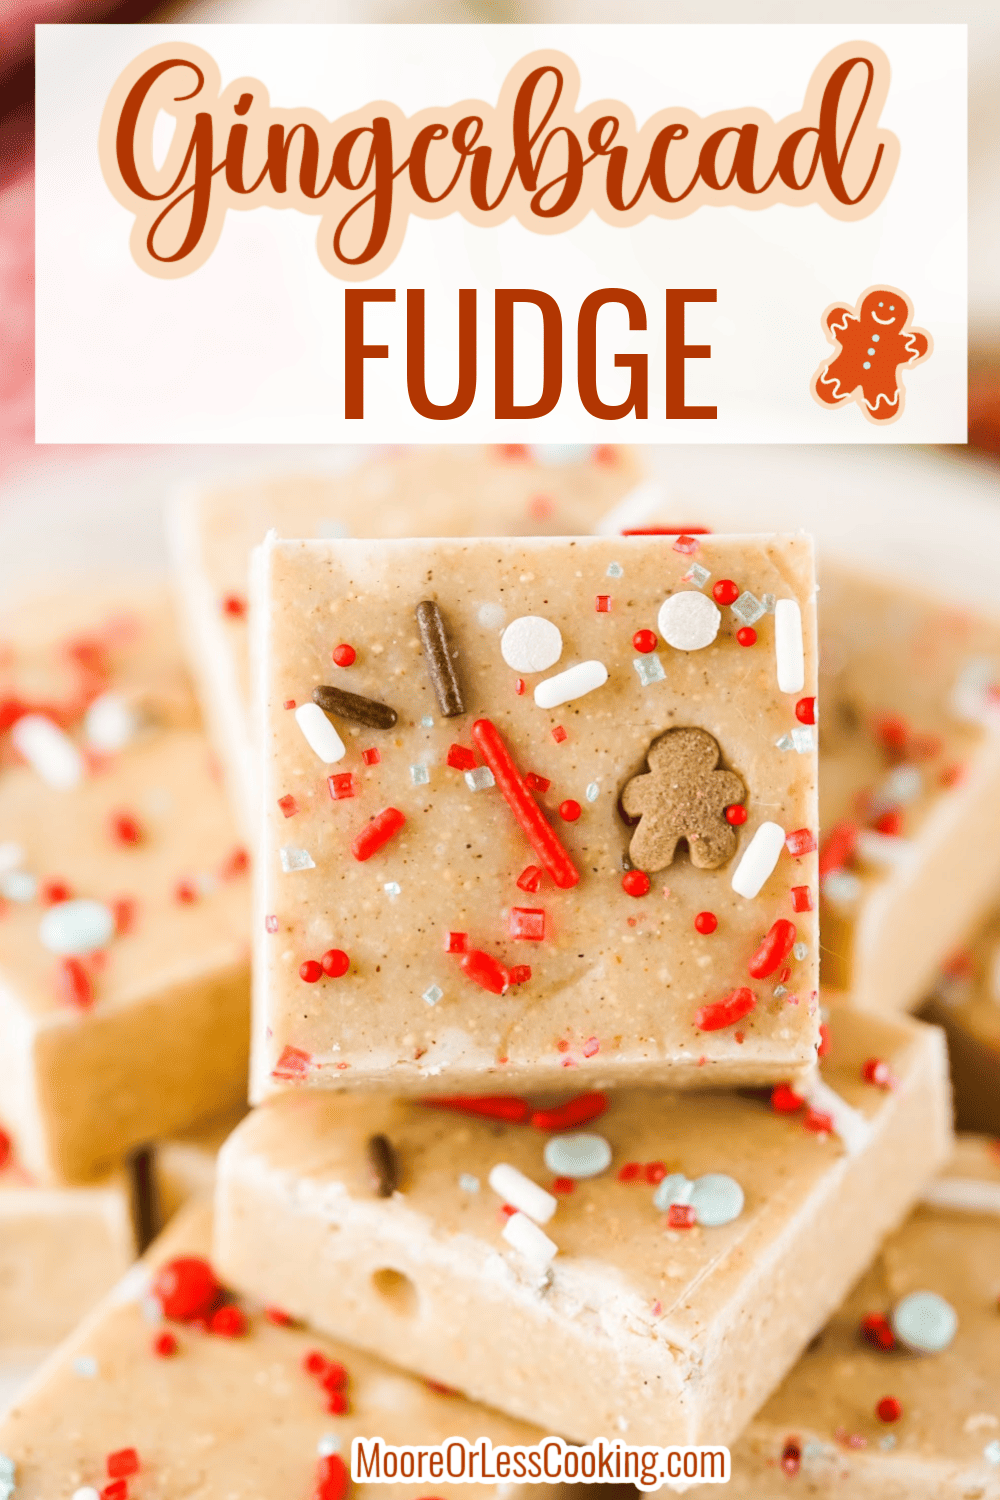 If you love the cozy gingerbread flavors of cinnamon, ginger and molasses, then this holiday candy recipe is for you! This easy Gingerbread Fudge takes just minutes to prepare for a creamy and sweetly spiced candy that's perfect for Christmas. via @Mooreorlesscook